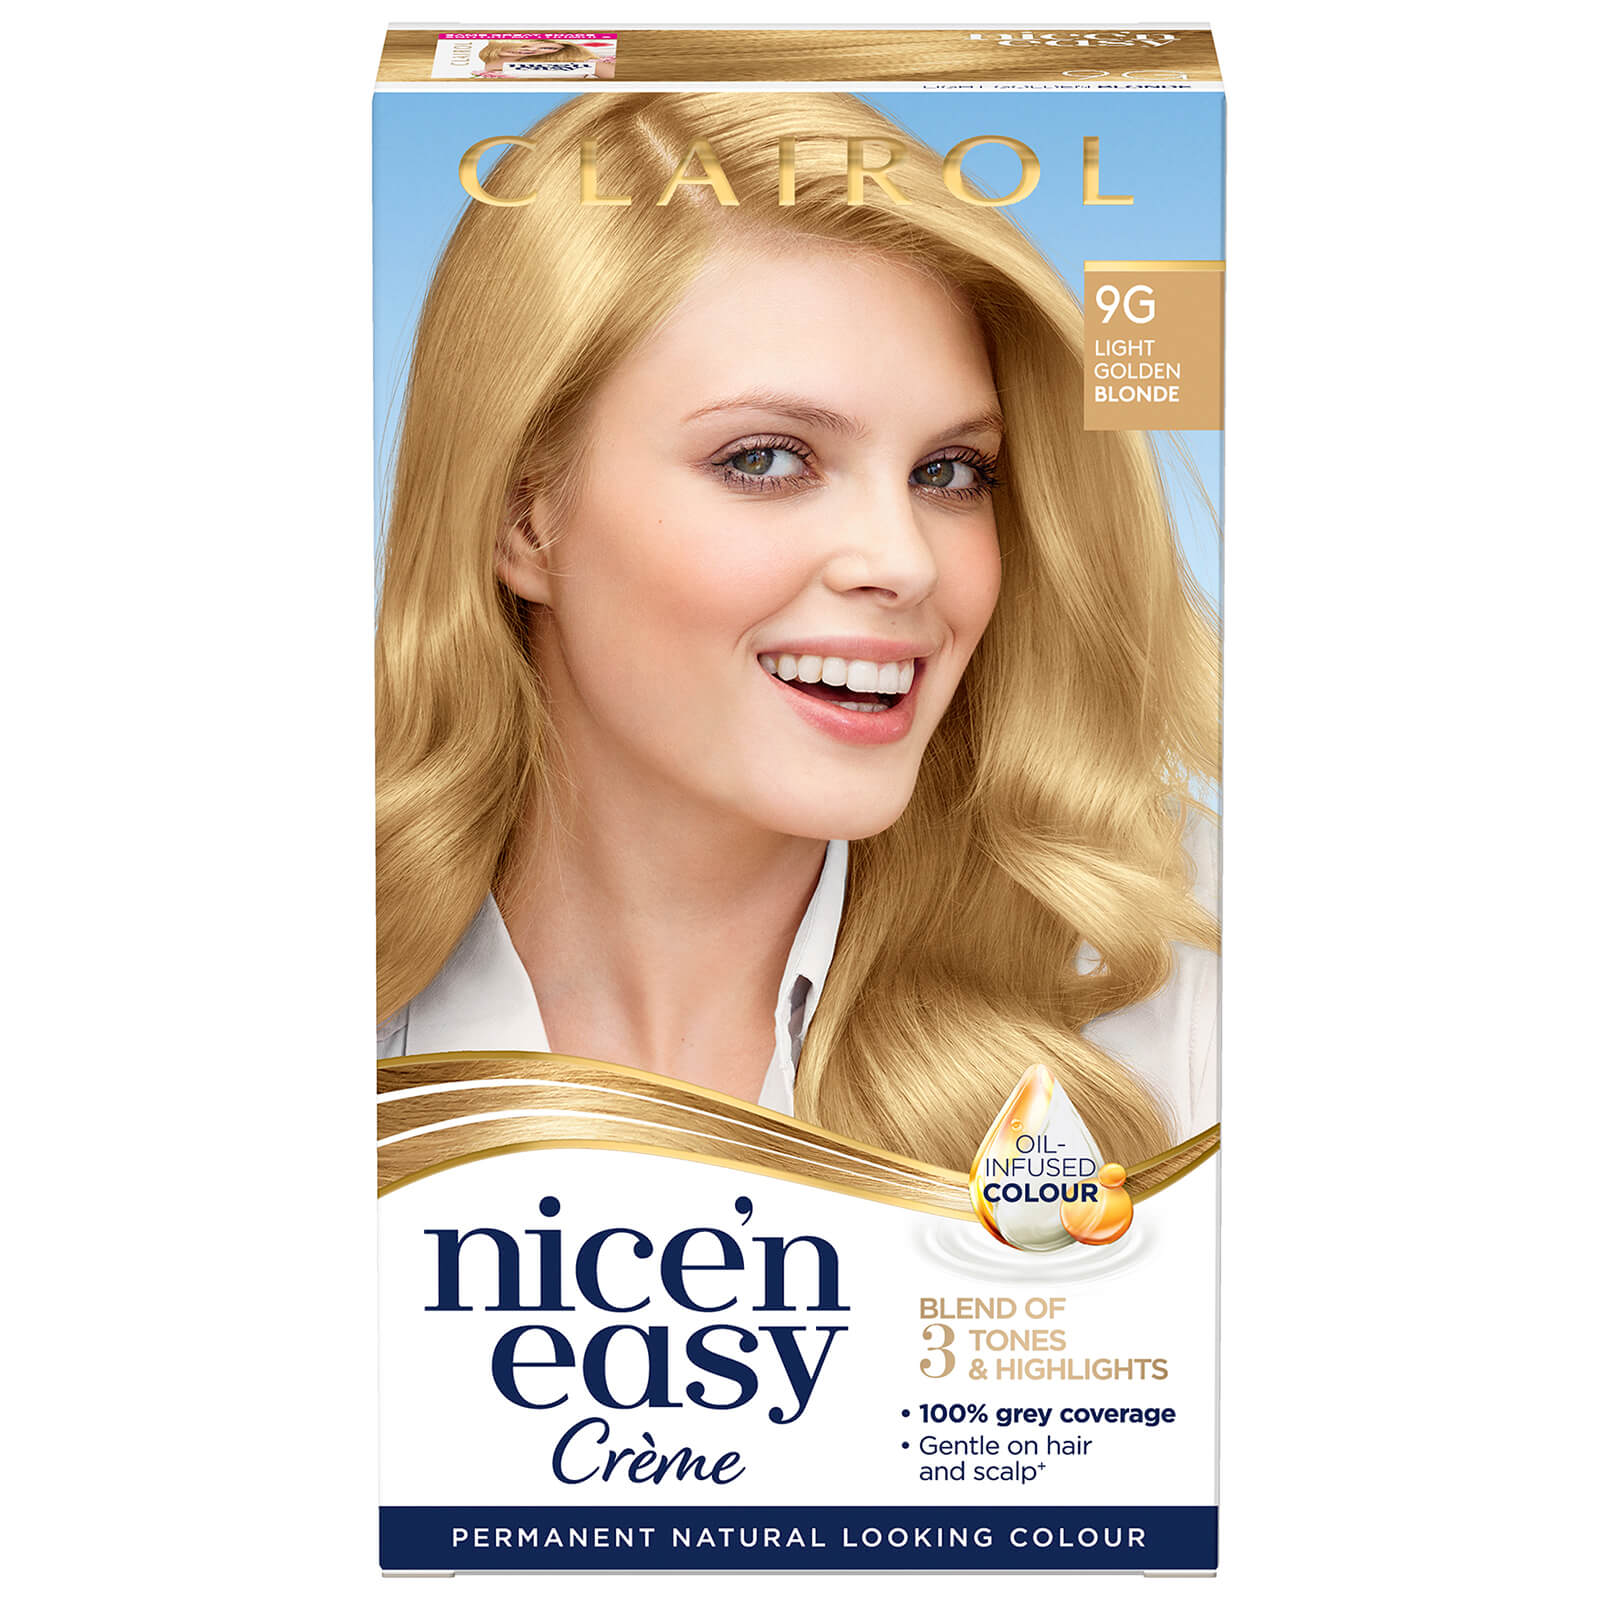 Clairol Nice' n Easy Crème Natural Looking Oil Infused Permanent Hair Dye 177ml (Various Shades) - 9G Light Golden Blonde